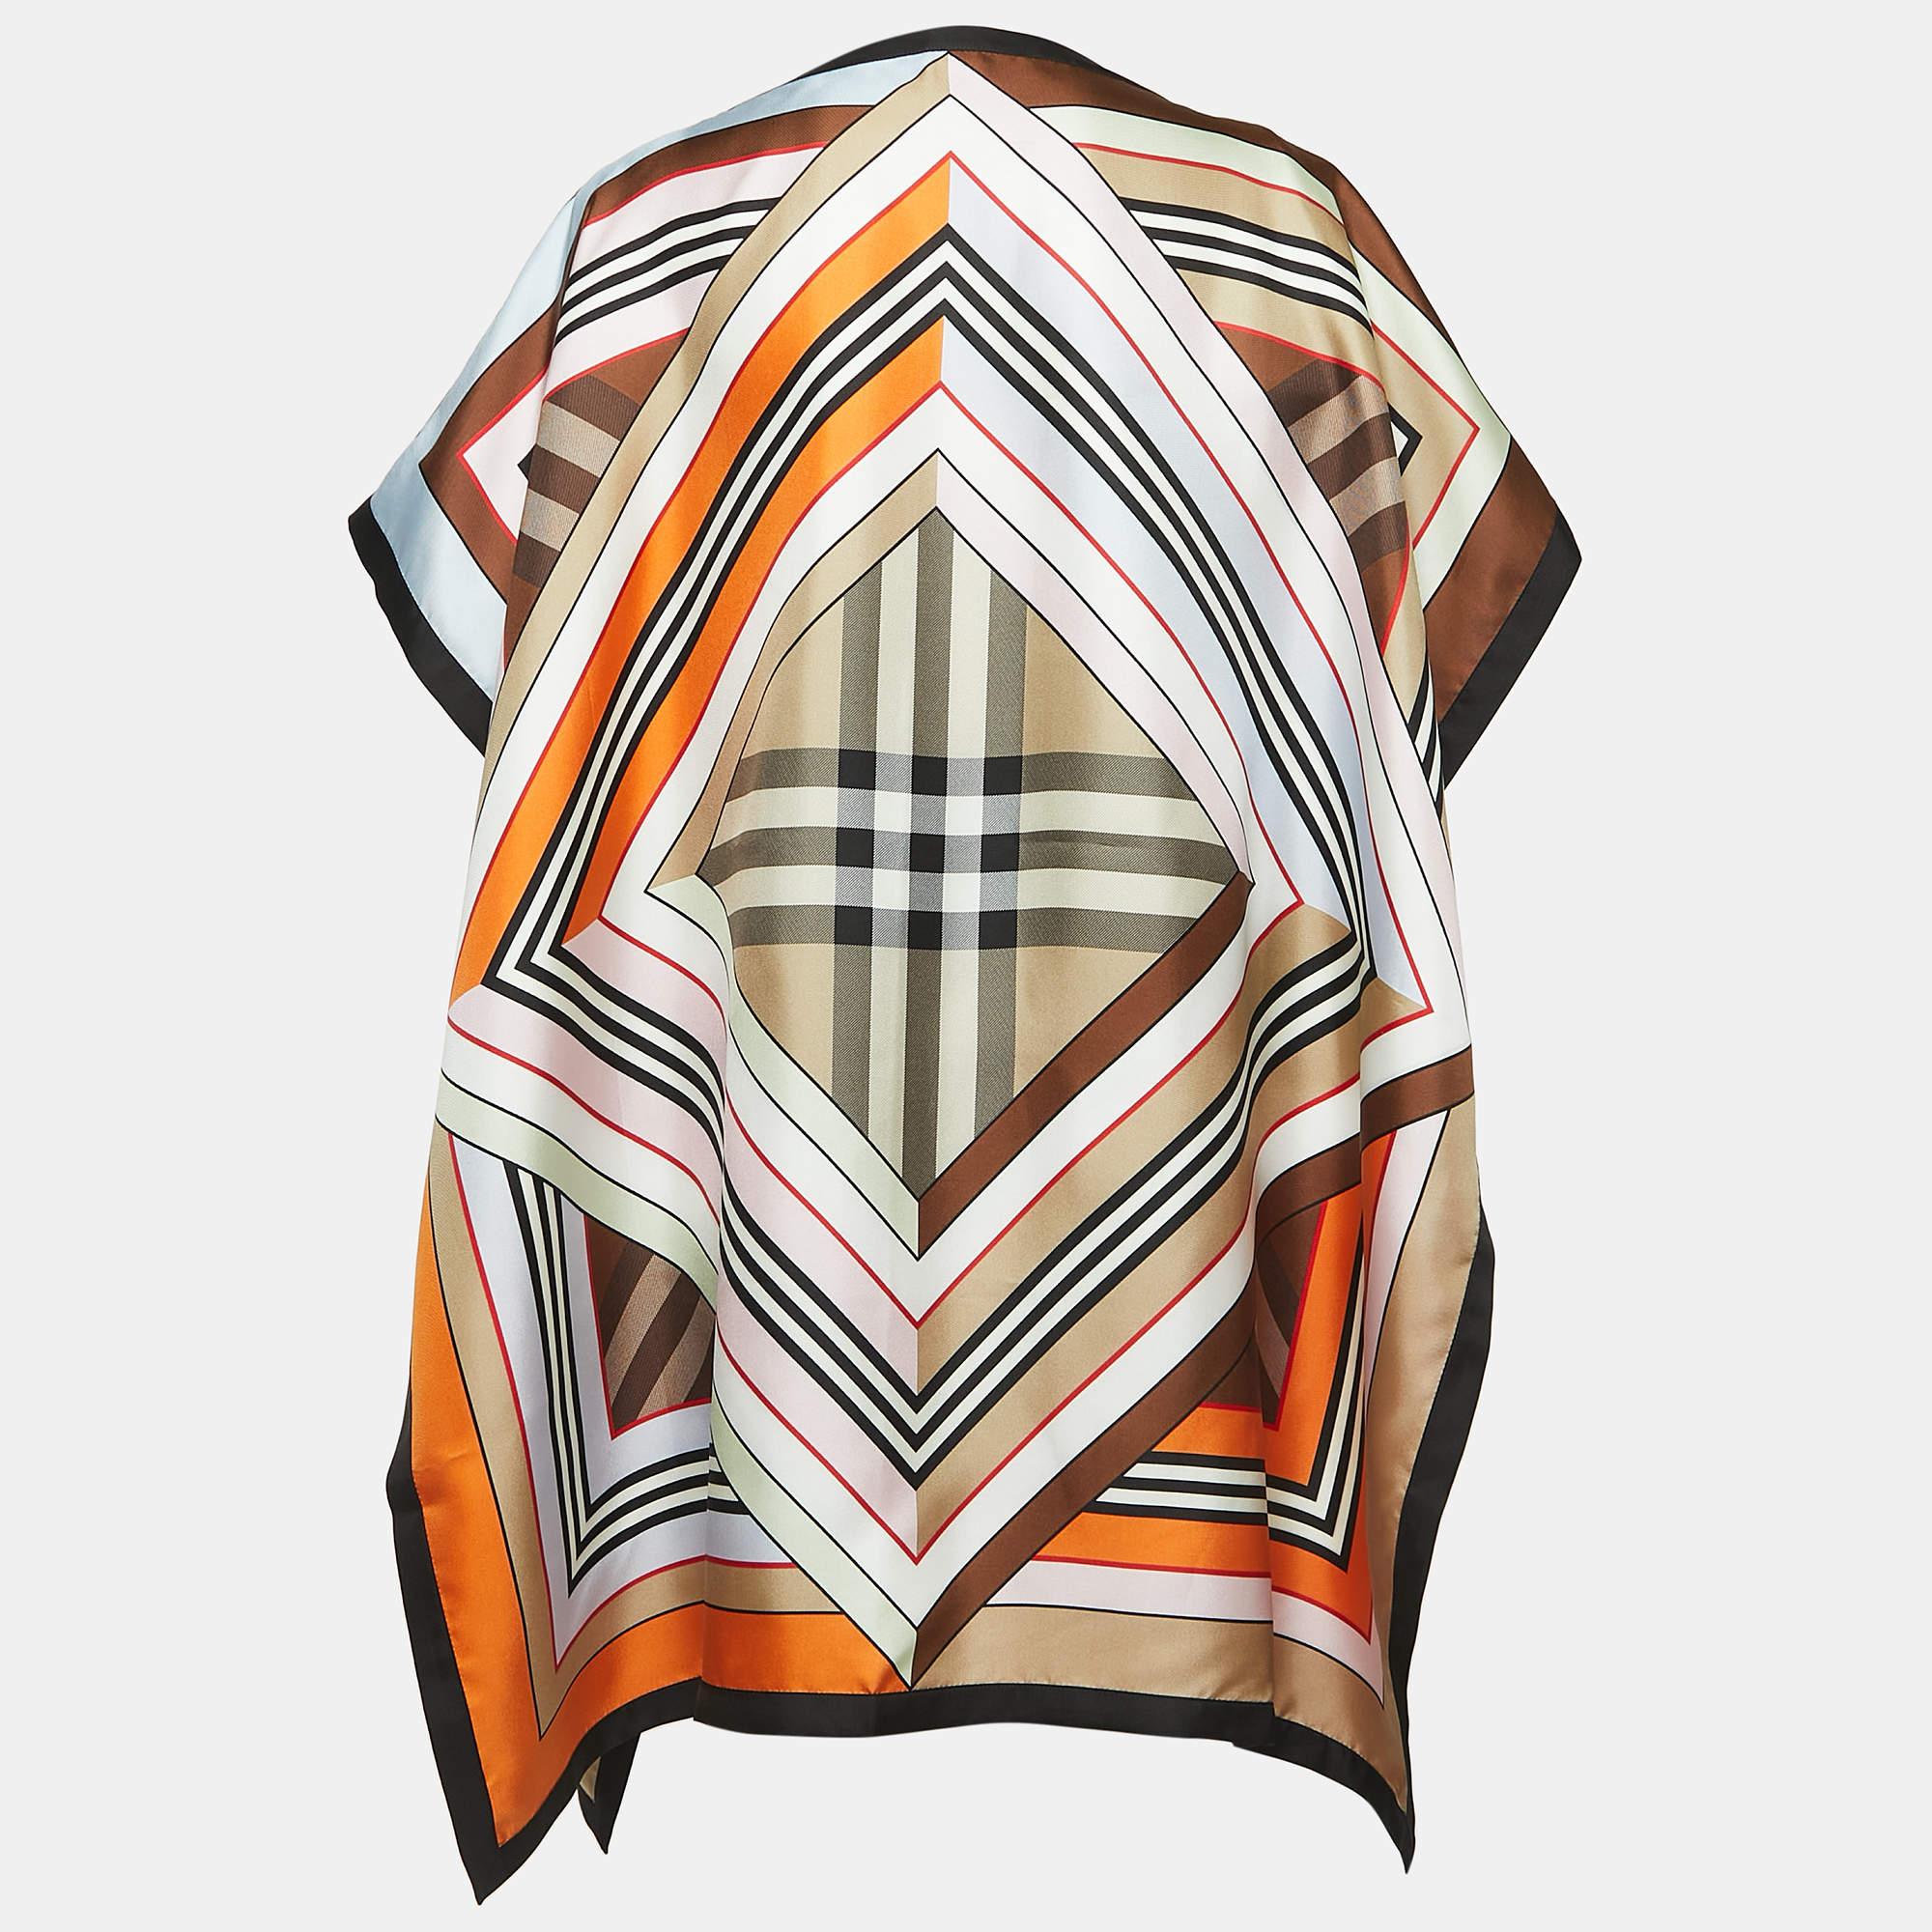 The Burberry cape coat is a luxurious fashion piece, crafted from sumptuous silk. It features a captivating montage print in a variety of vibrant colors, a cape-style design, and a loose, flowing silhouette. This coat is a statement of artistry and